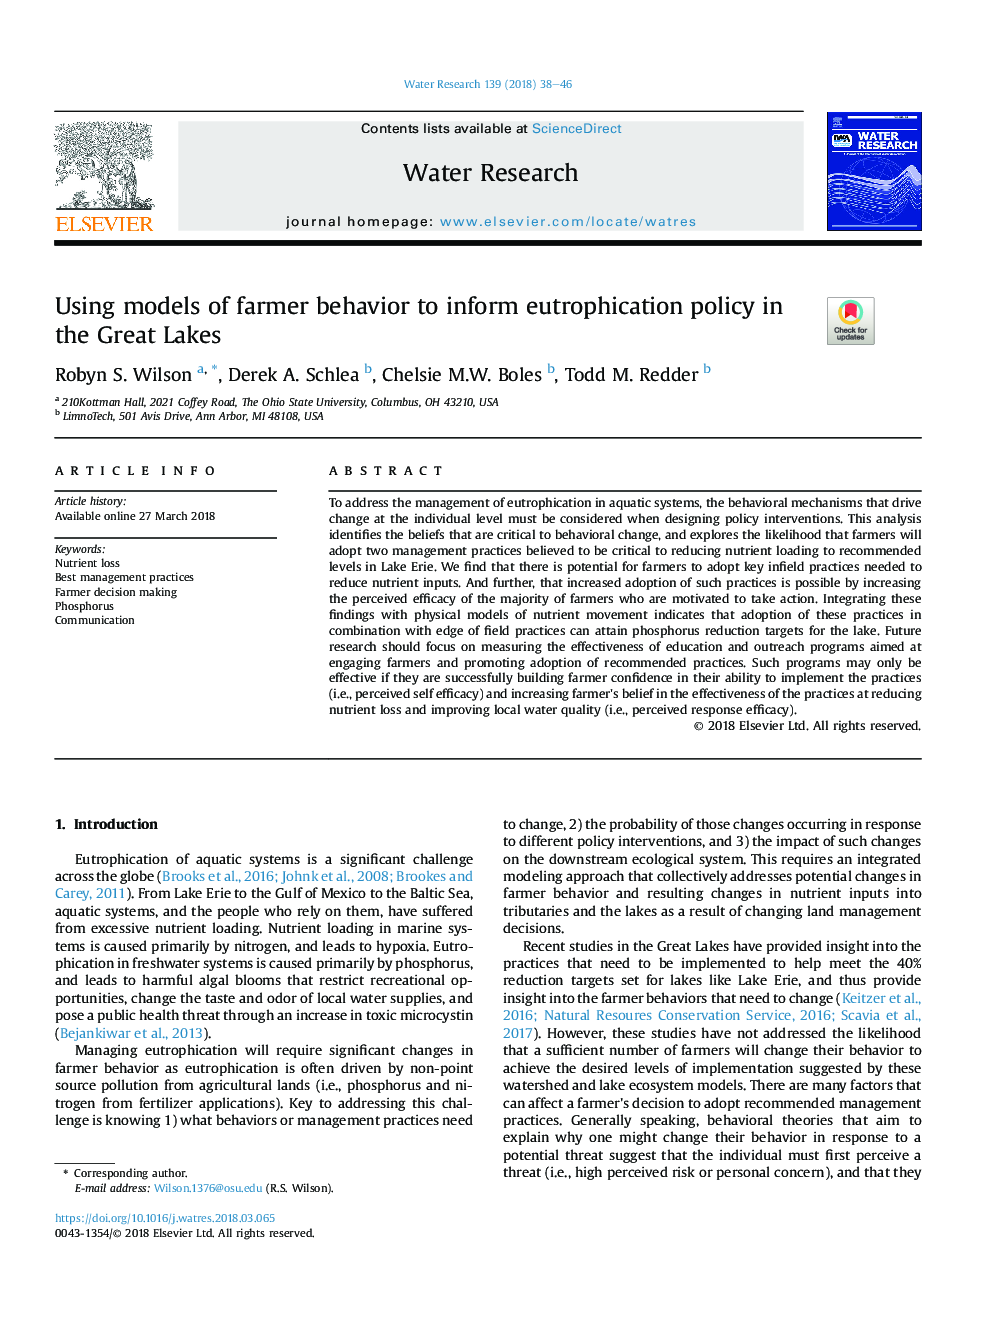 Using models of farmer behavior to inform eutrophication policy in the Great Lakes